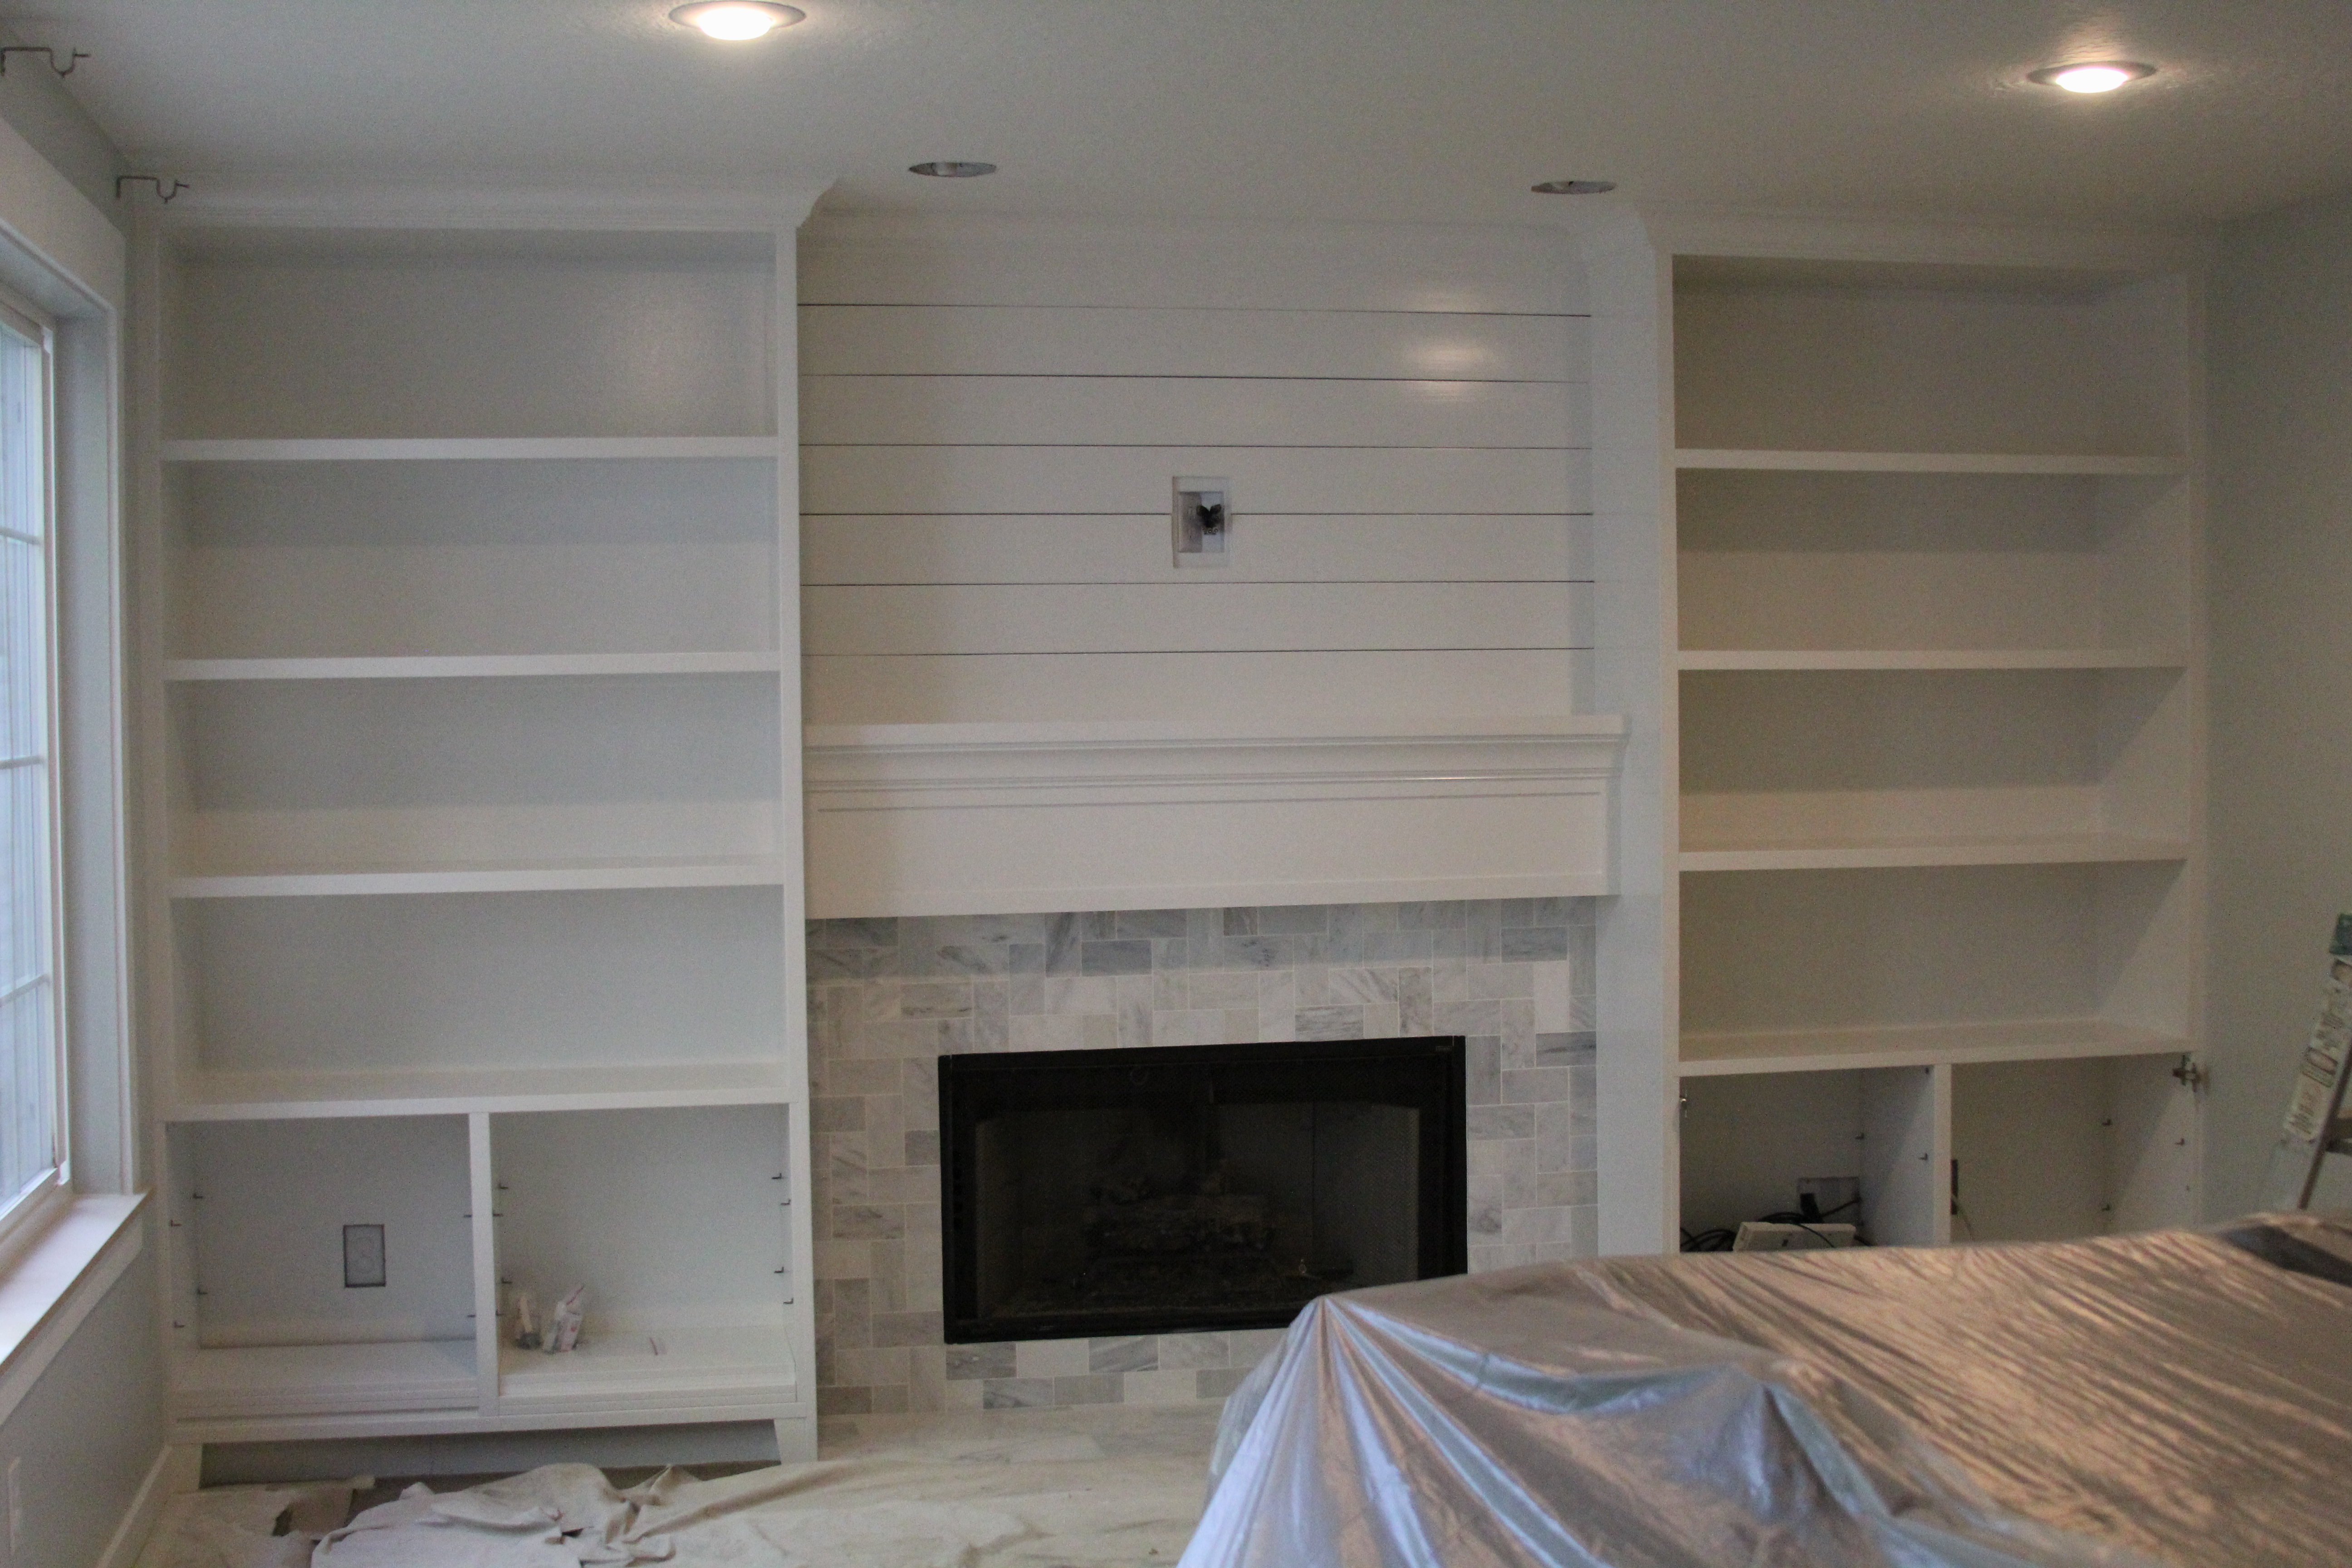 Diy Built Ins Part 2 Stagg Design, How To Build Built In Bookcases Around Fireplace